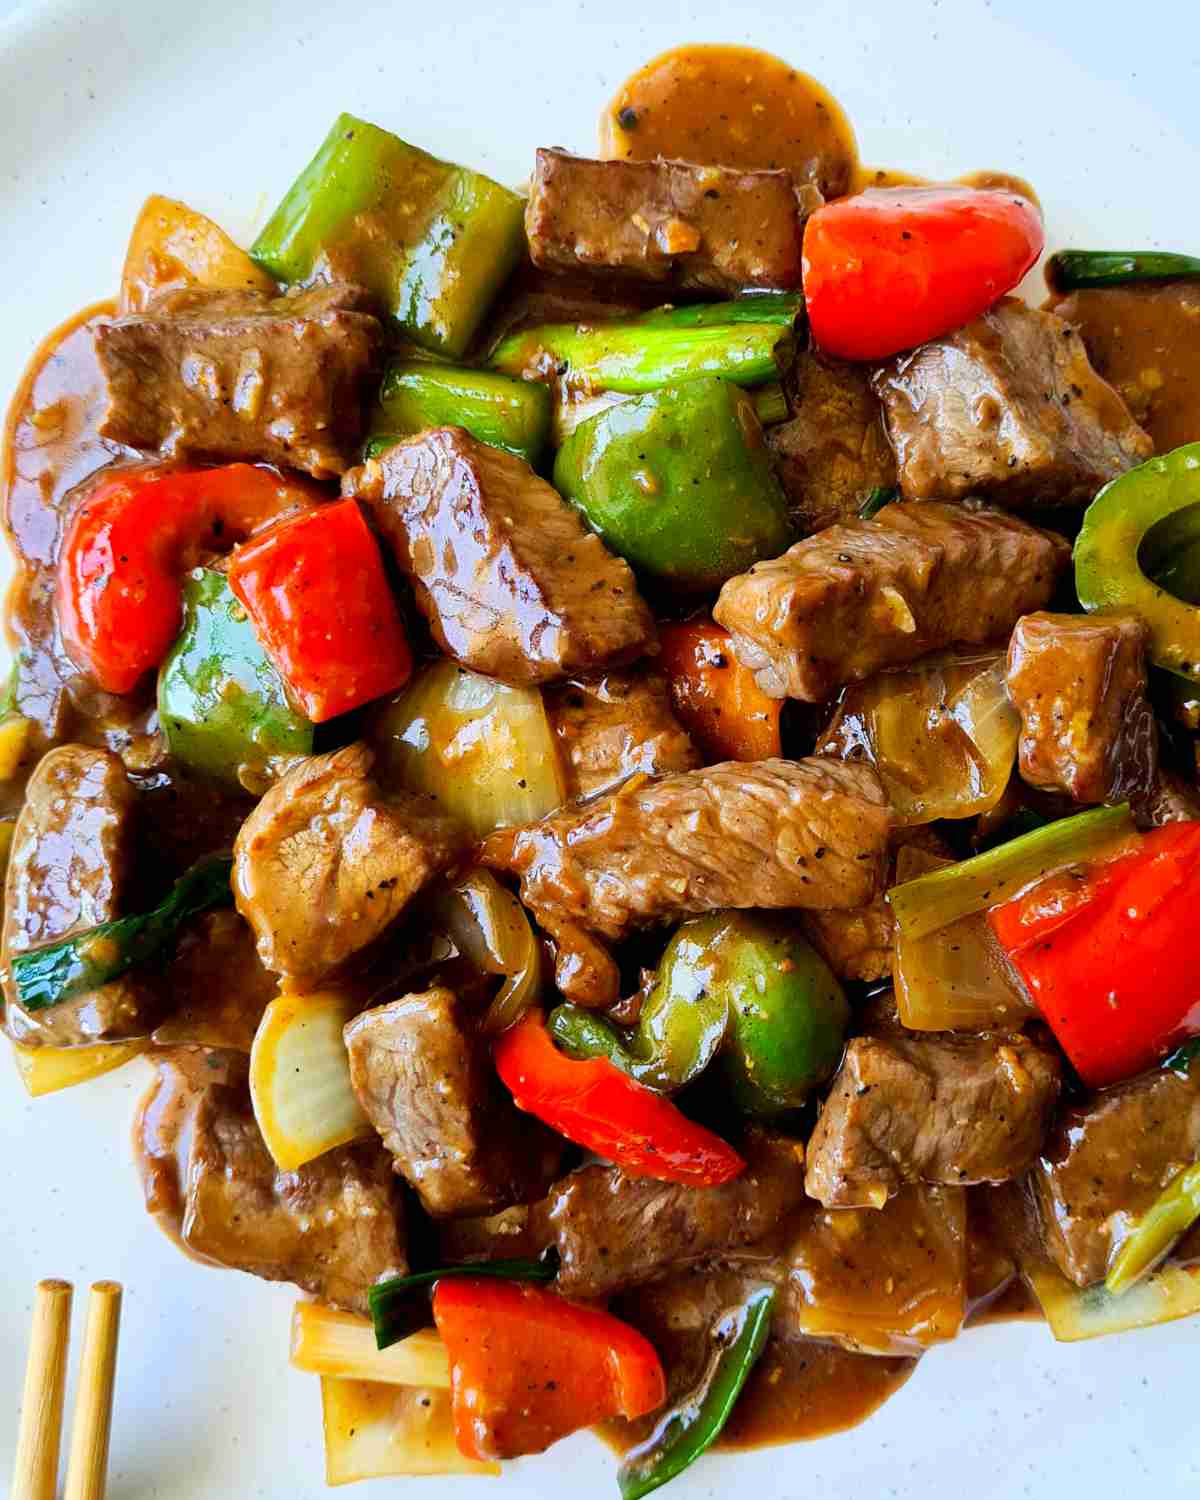 Glossy beef cubes and vegetables on a white plate